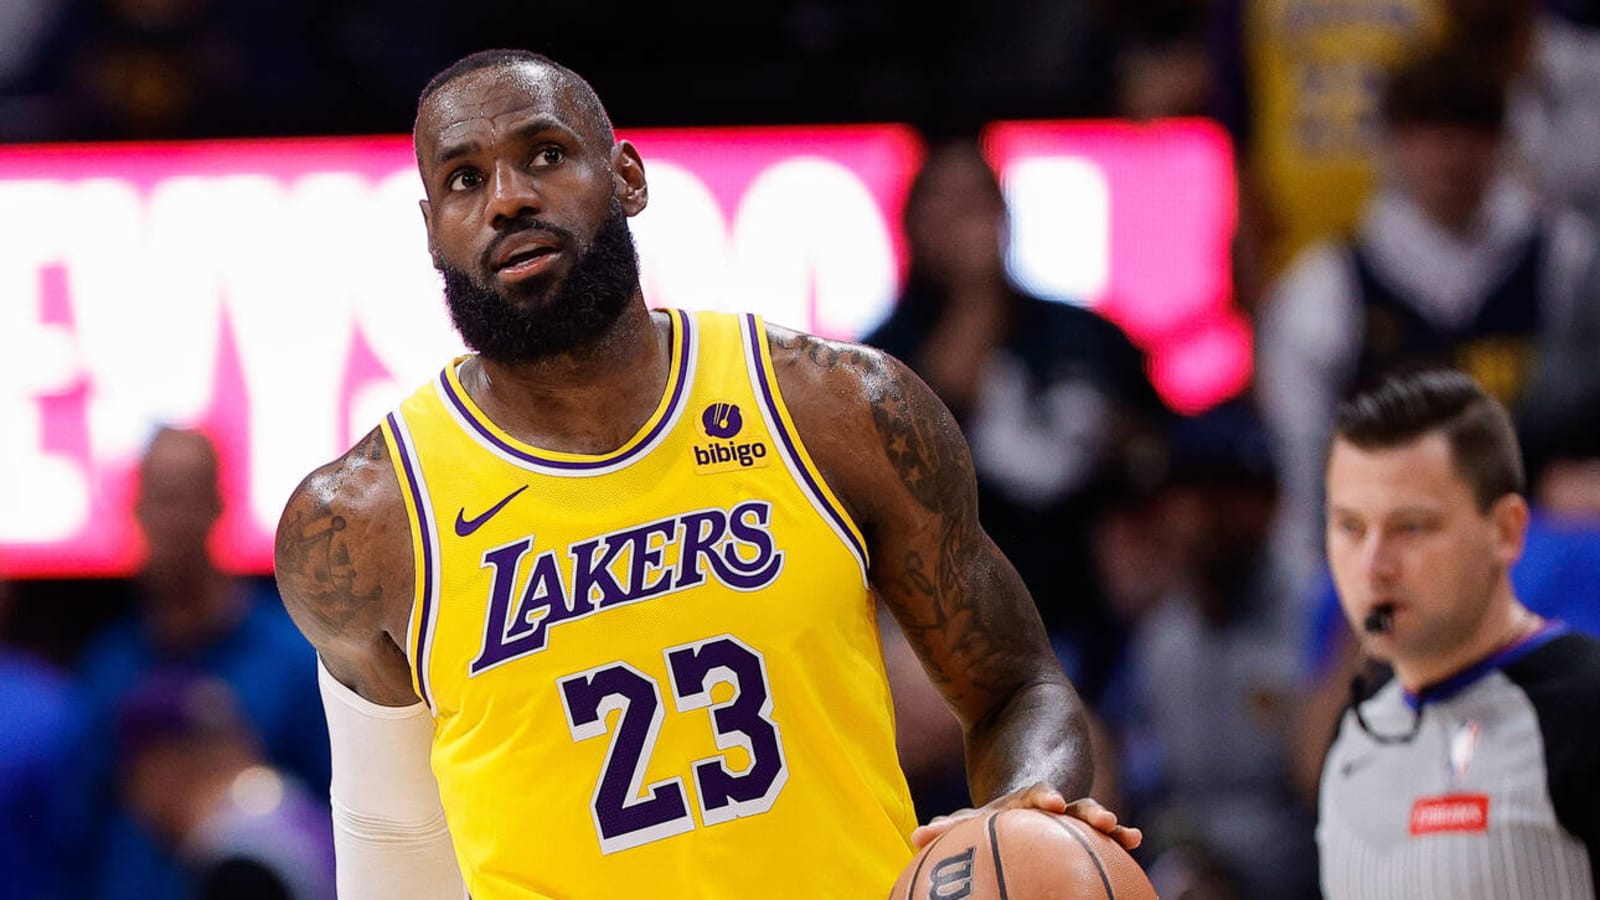 LeBron James Will Not Leave The Lakers To Play With Bronny